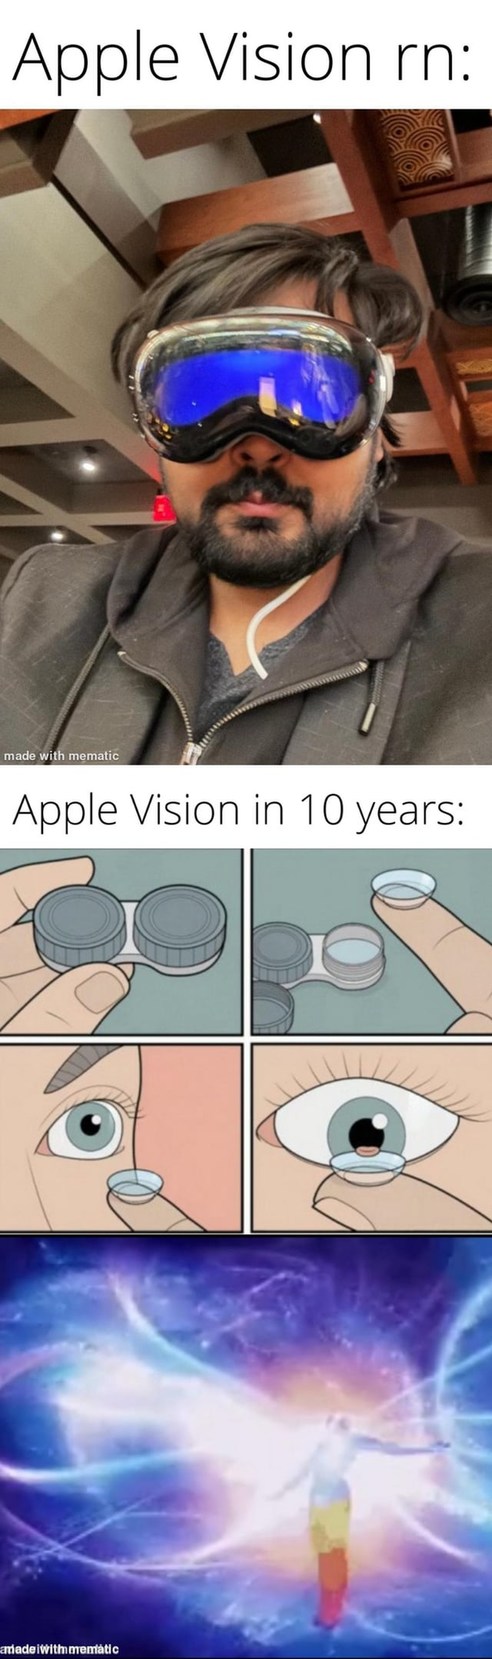 Vision pro in 10 years - meme